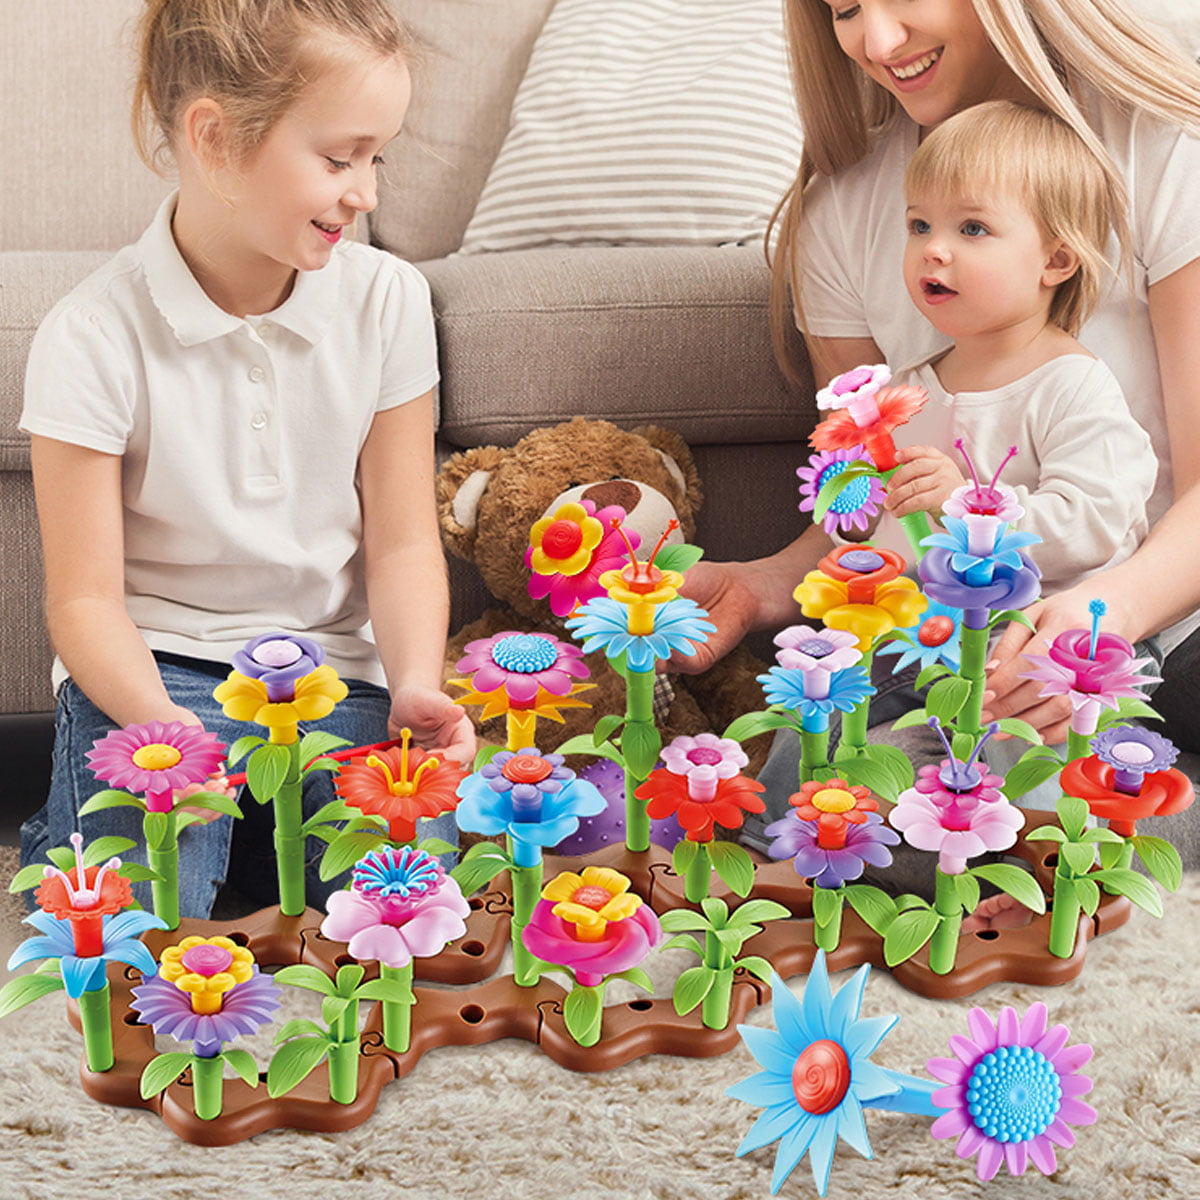 5 171PCS Gardening Pretend Gift for Kids Toy Flower Garden Building Toys for Girls Build a Bouquet Sets for 3 4 6 Year Old Toddler Girls 